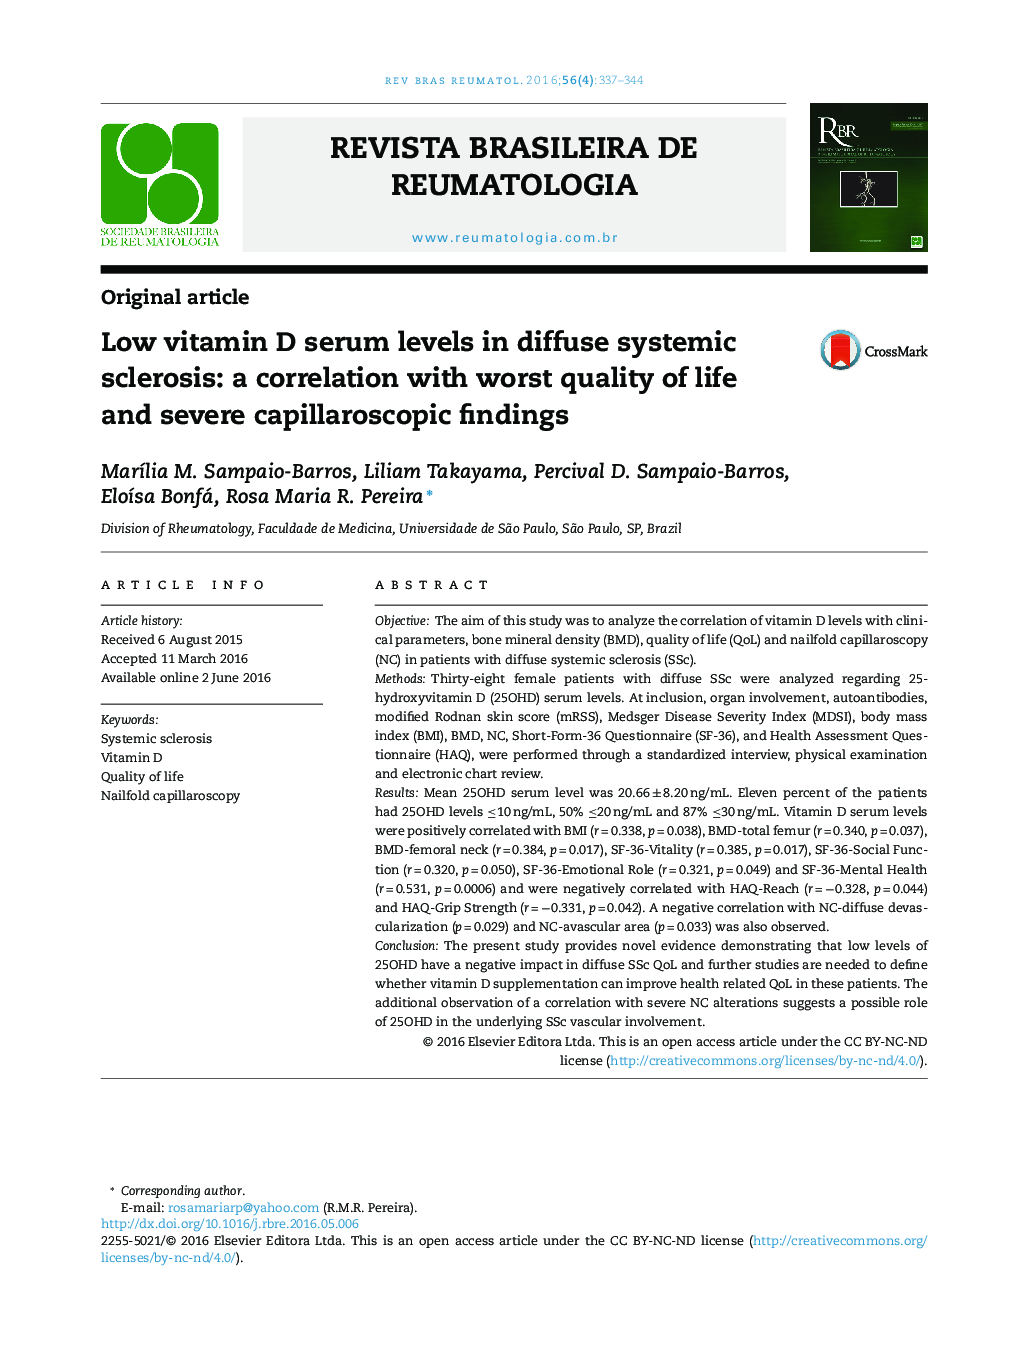 Low vitamin D serum levels in diffuse systemic sclerosis: a correlation with worst quality of life and severe capillaroscopic findings